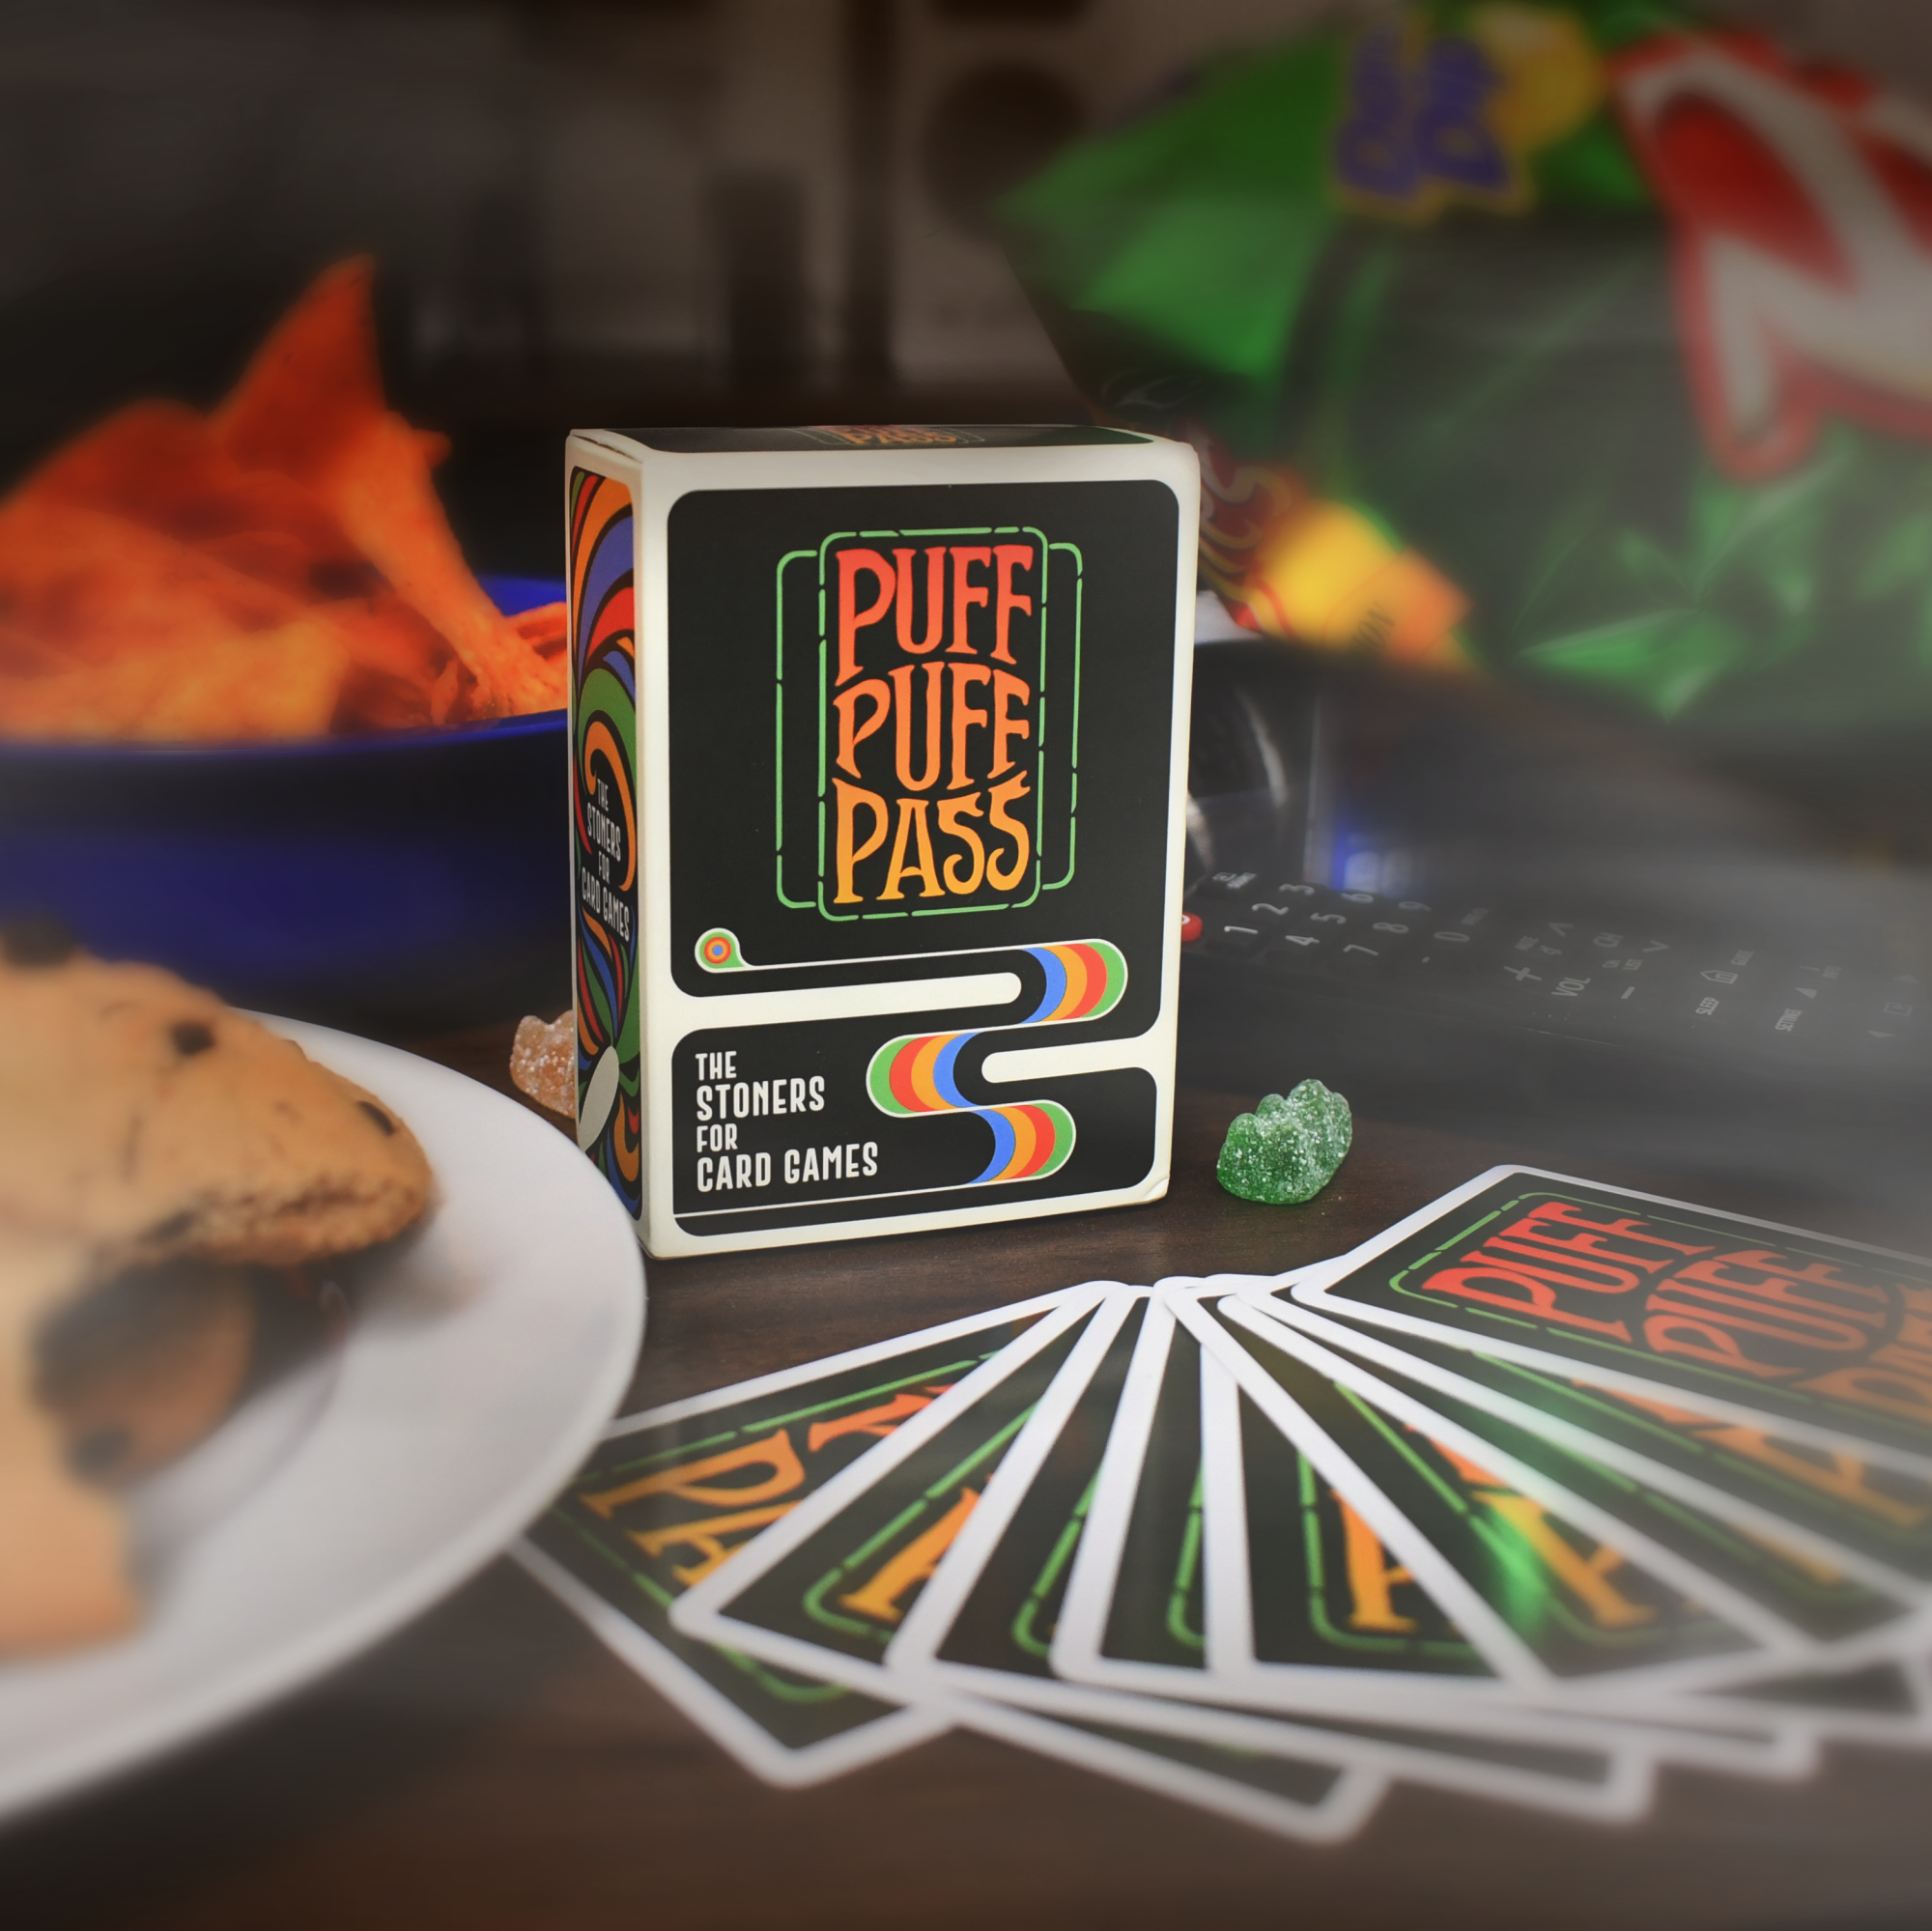 Cards from the Puff Puff Pass card game rest on a table next to cookies